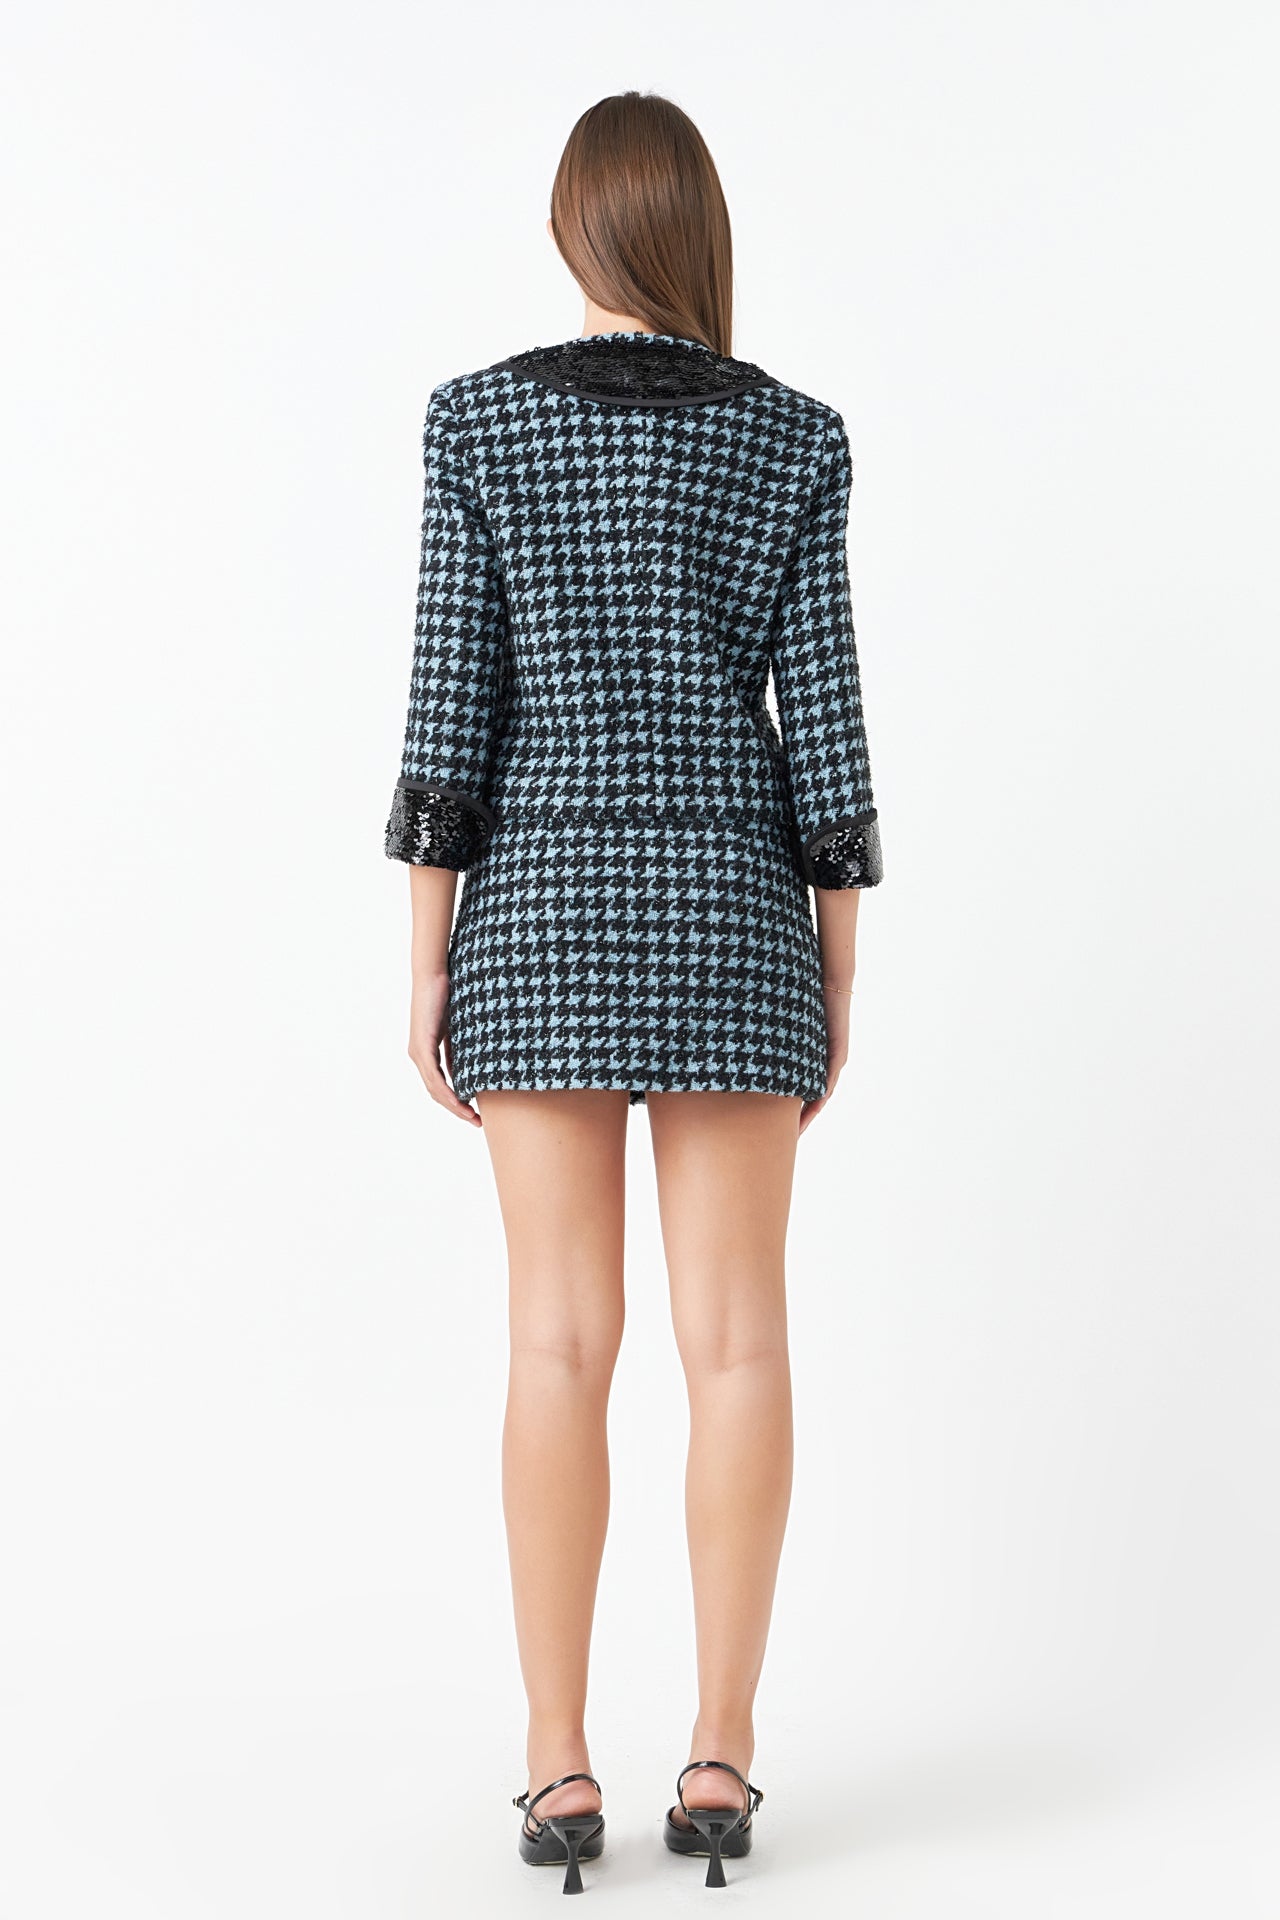 ENDLESS ROSE - Premium Houndstooth Mini Skirt - SKIRTS available at Objectrare